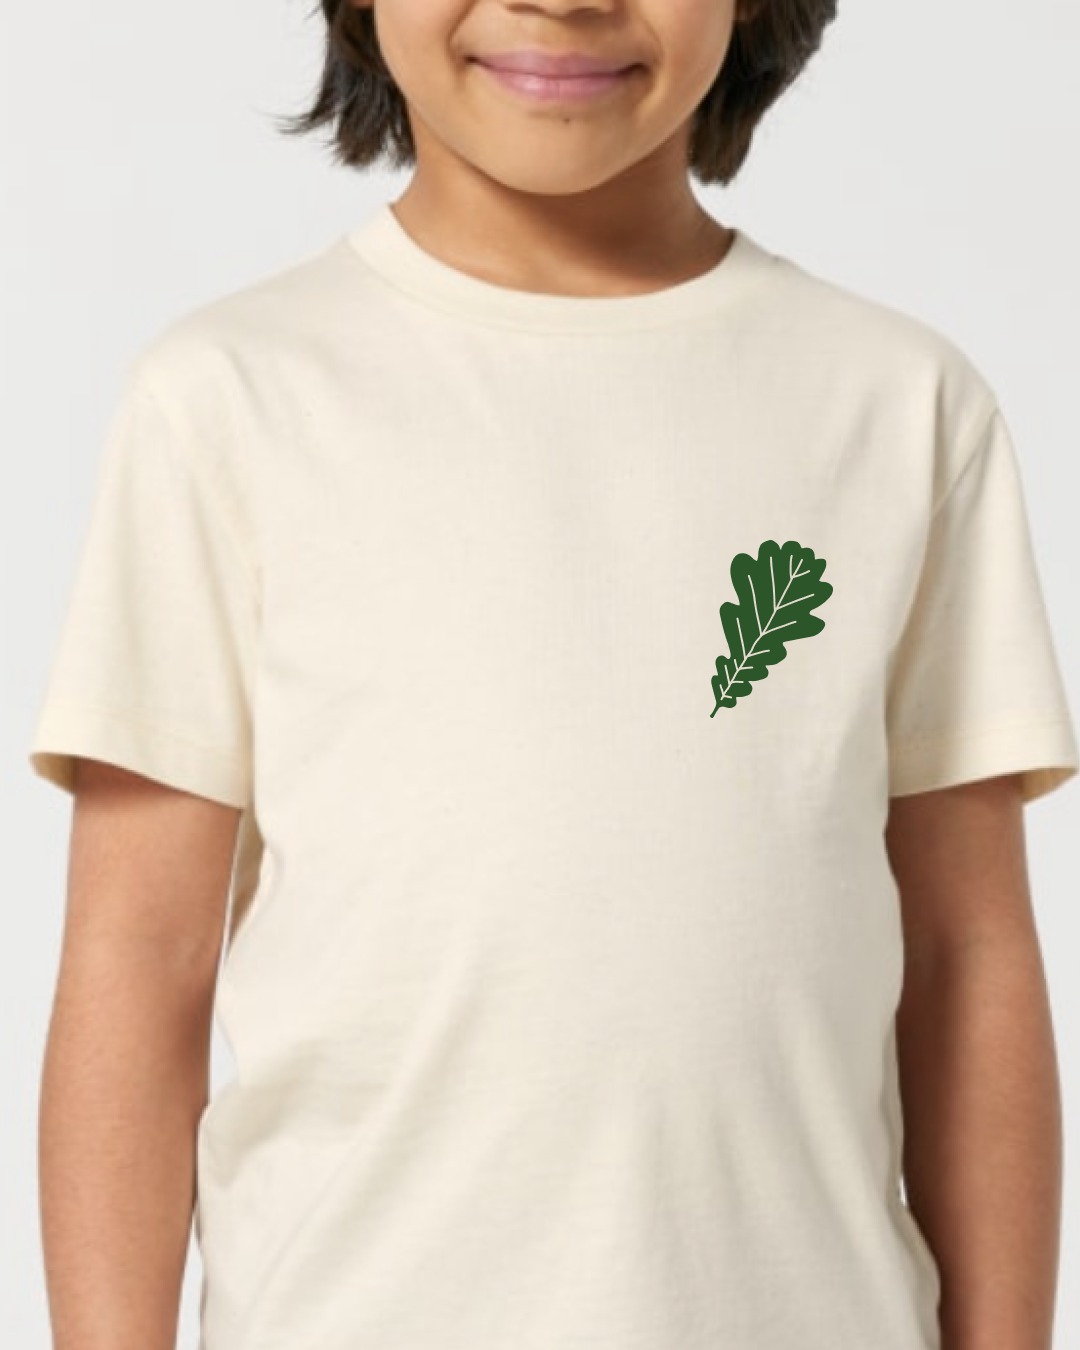 Small Kids Tee (ages 5-6)